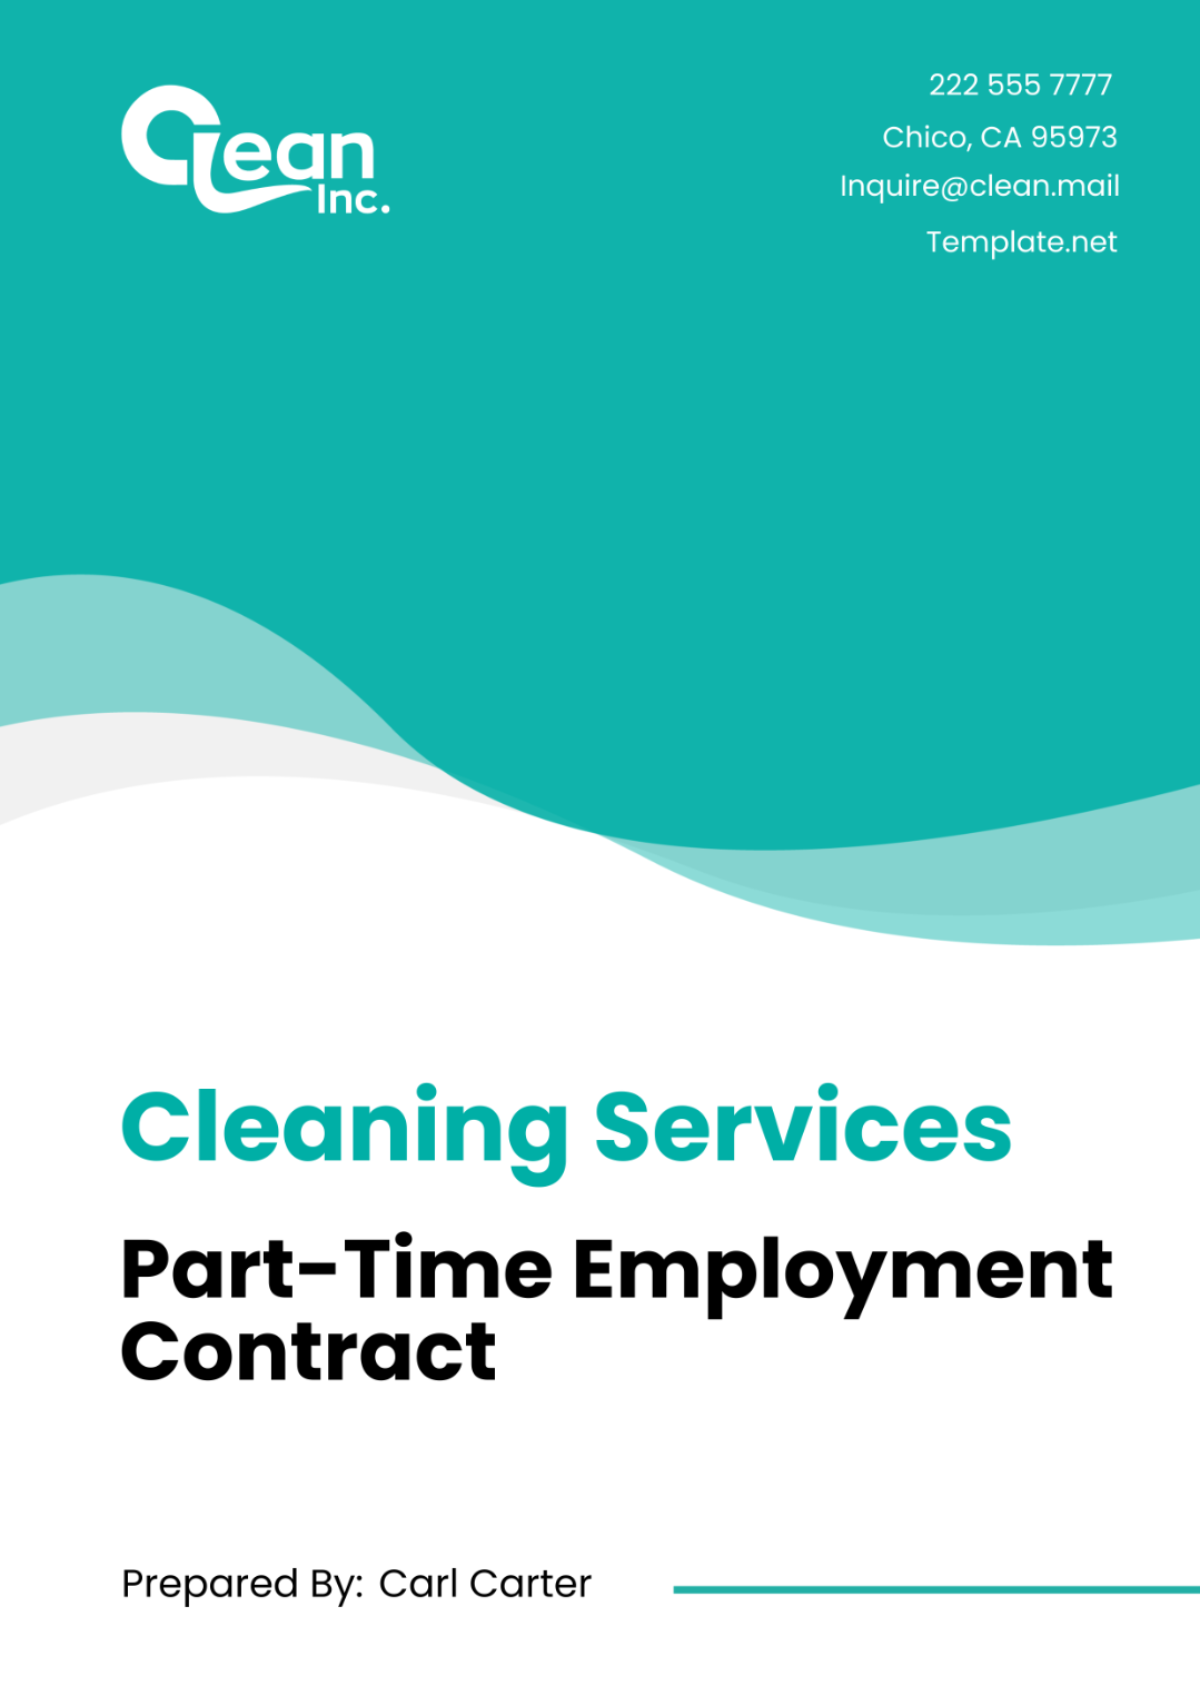 Free Cleaning Services Part-Time Employment Contract Template